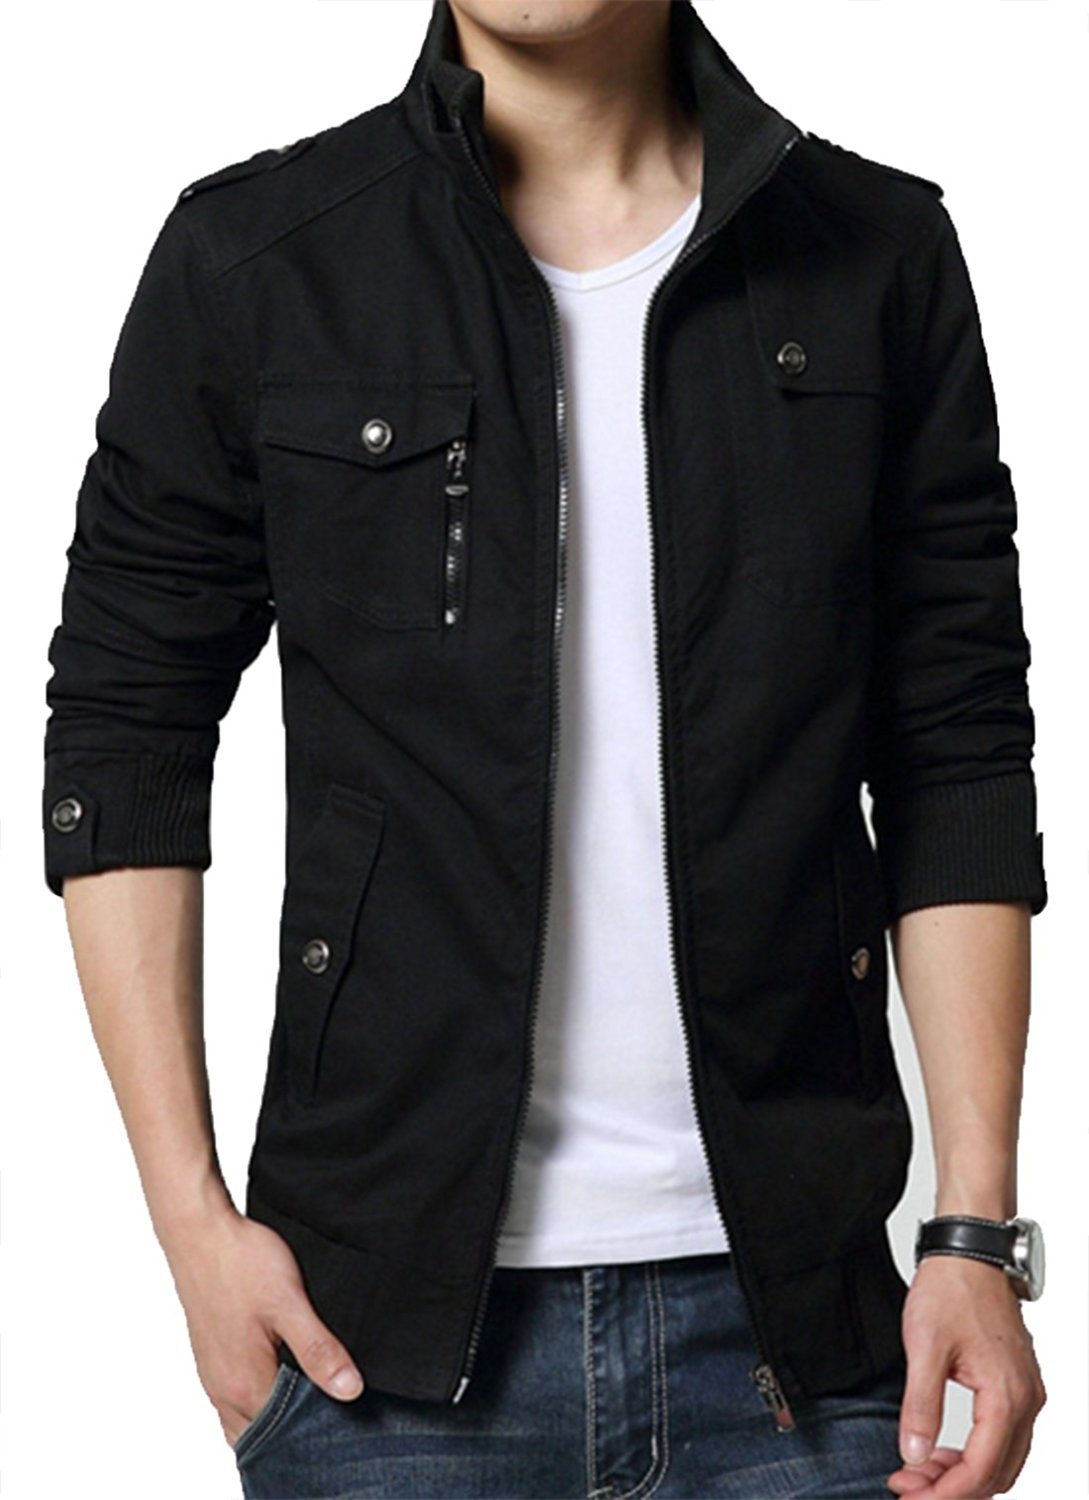 Xiaolv88 Men's Solid Cotton Casual Wear Stand Collar Jacket